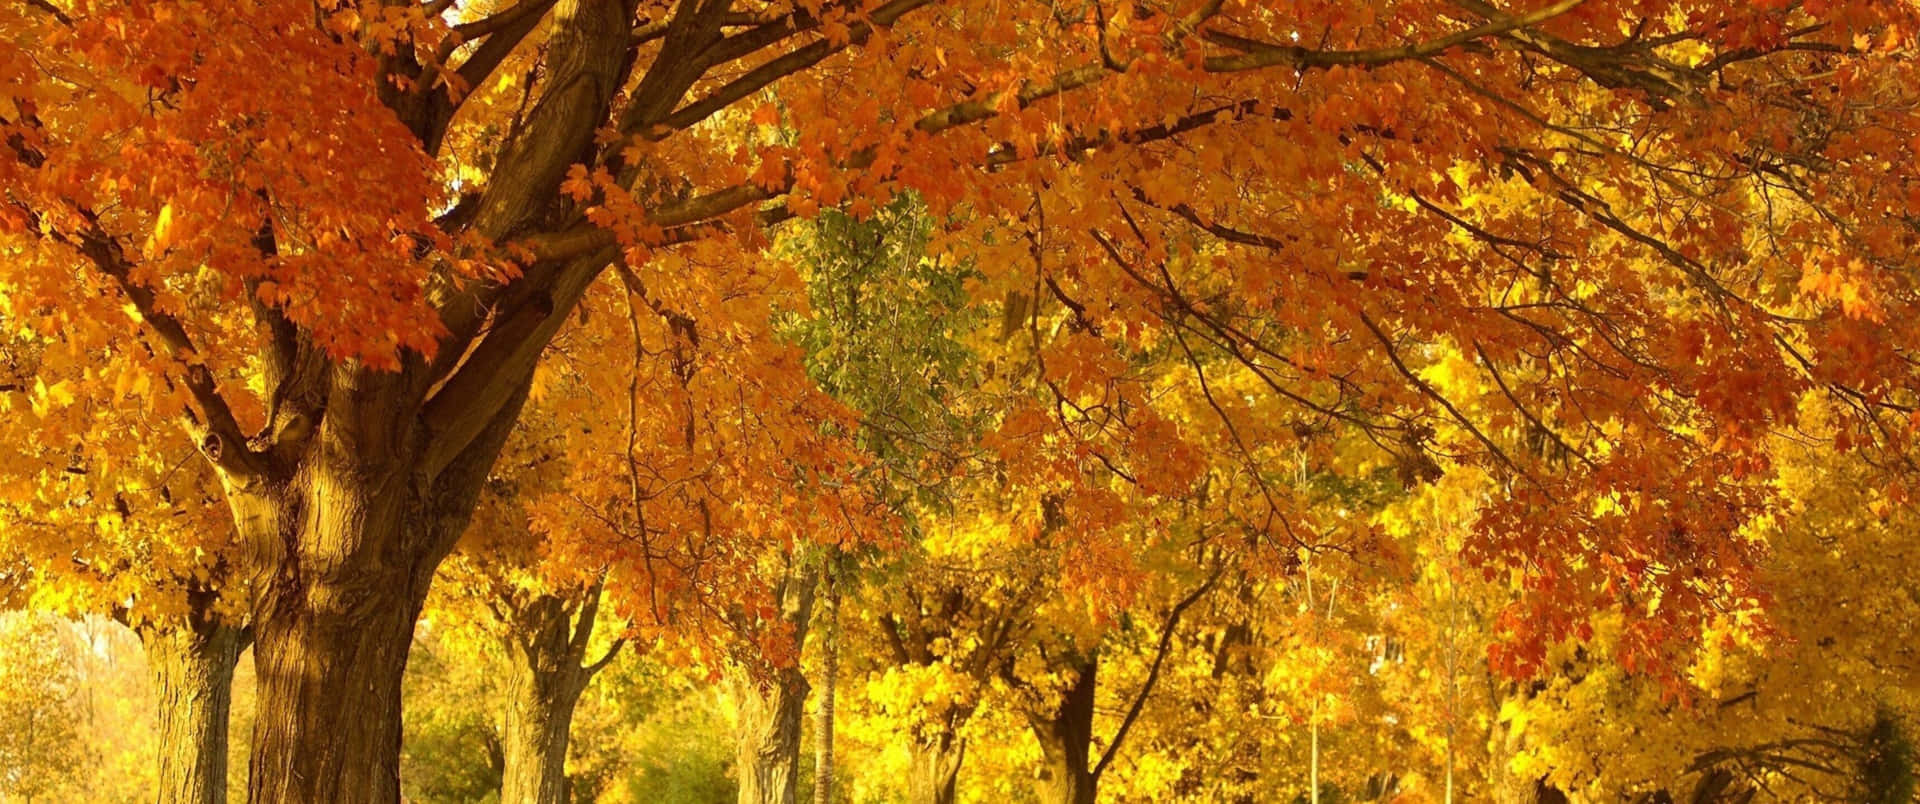 Enjoy the picturesque Fall scenery Wallpaper